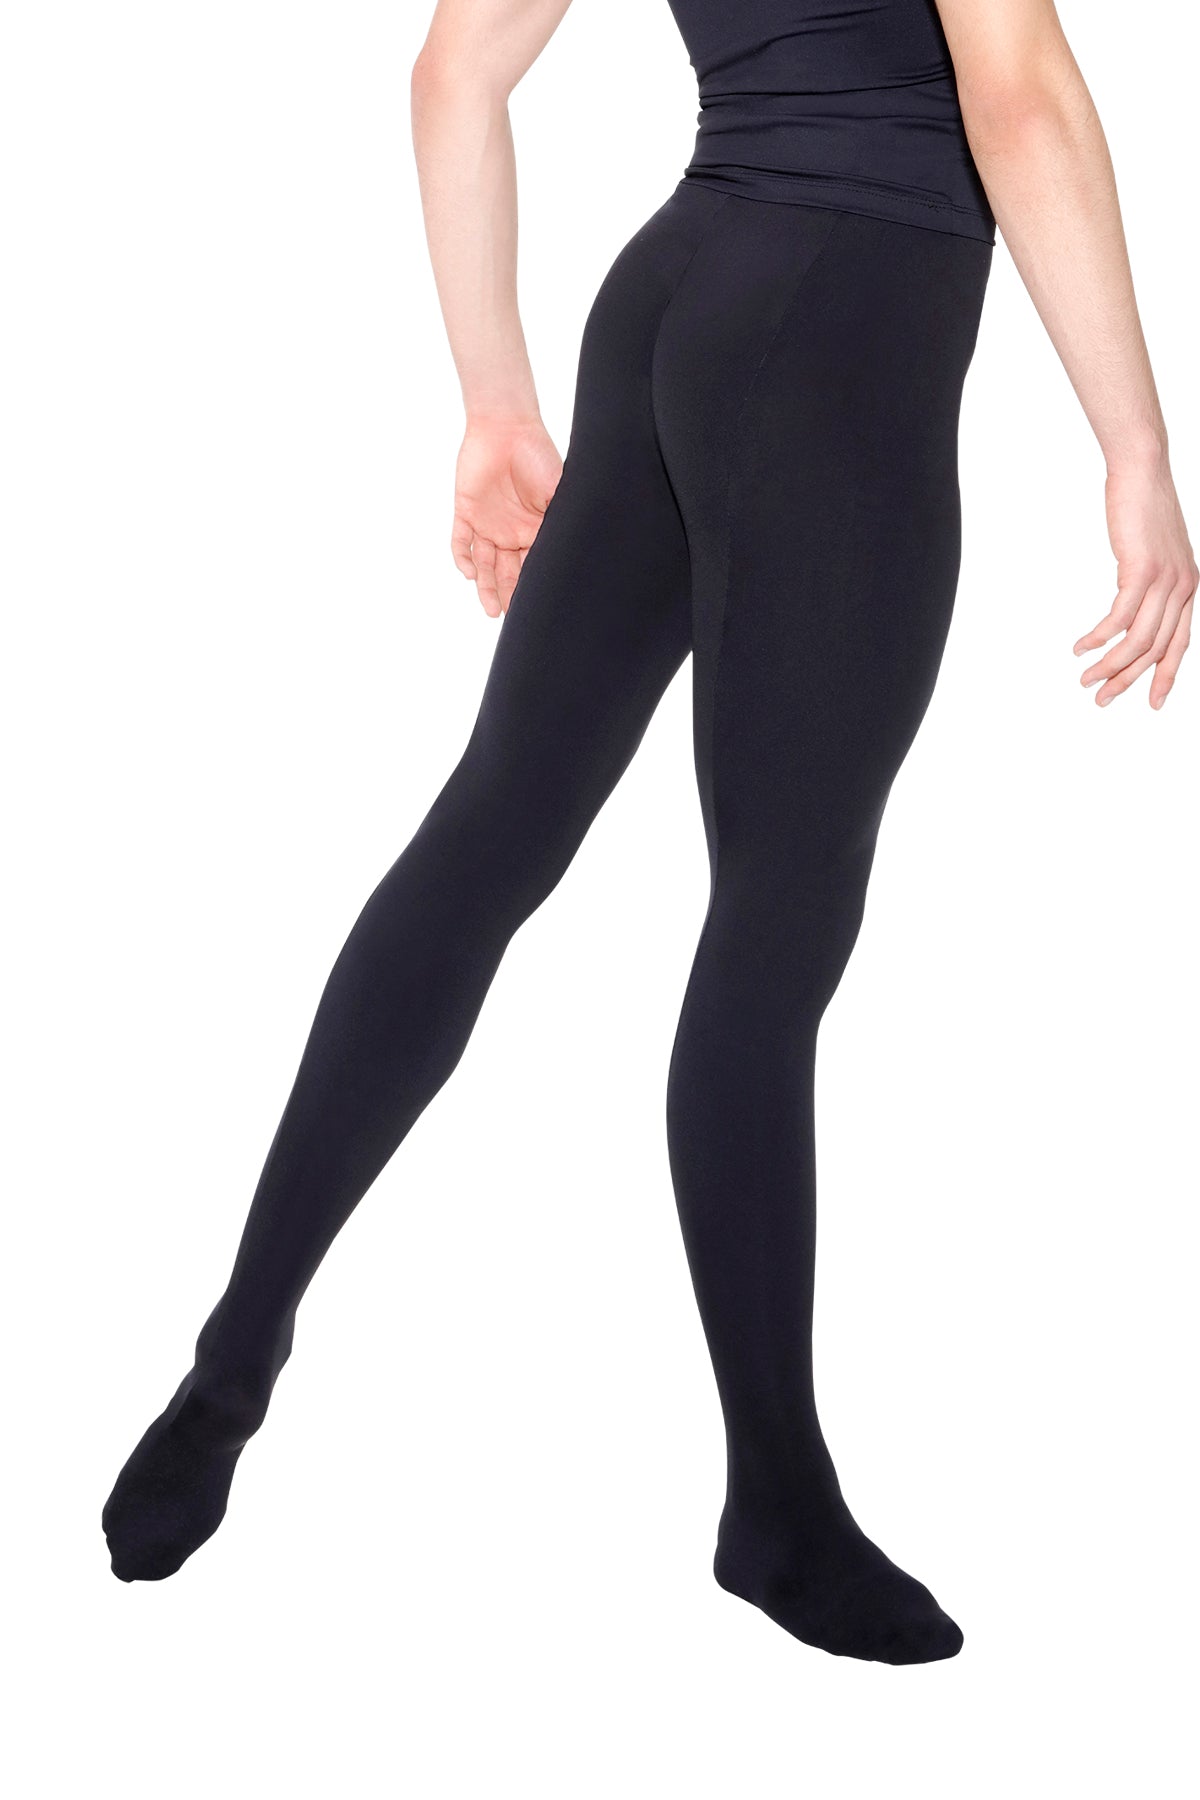 Moscow - Men's Opaque Tights - D494